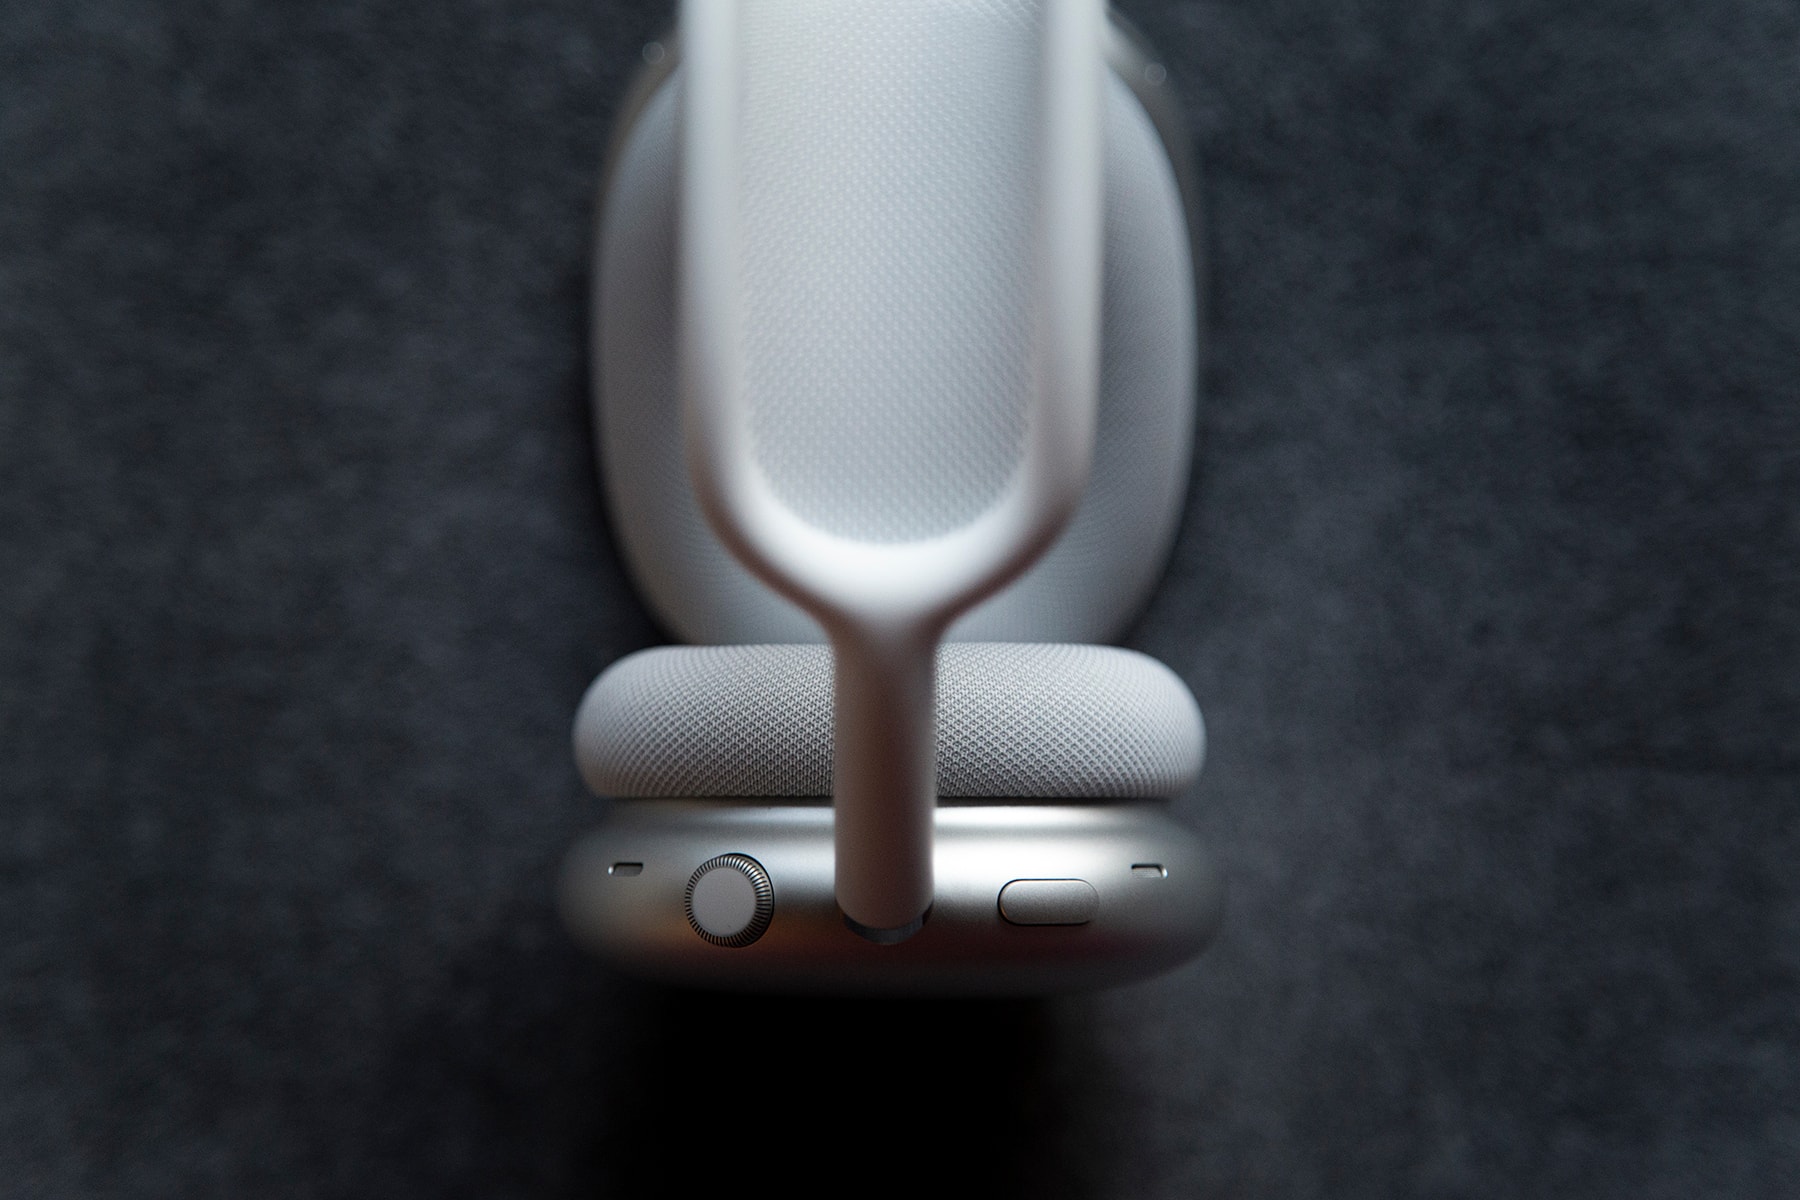 Apple AirPods Max Review Unboxing and Closer Look Photos First Look iPhone 12 Pro Max Mini Spotify Music